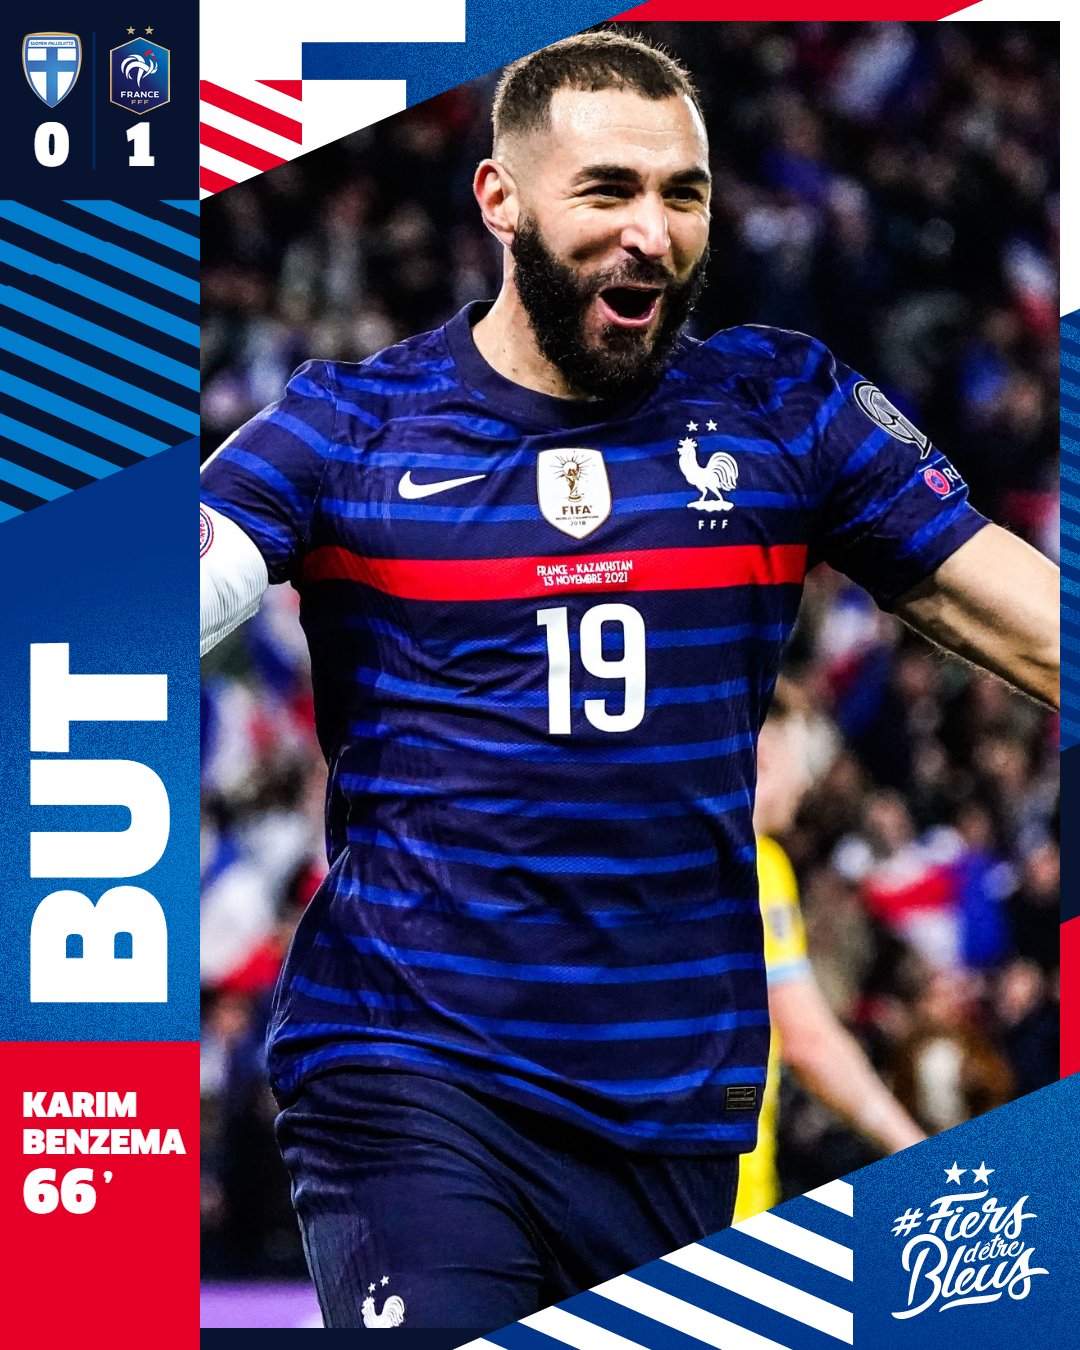 Finland vs France: World champions France beat Finland 2-0, both goals came in 2nd half as Benzema and Mbappe found the net